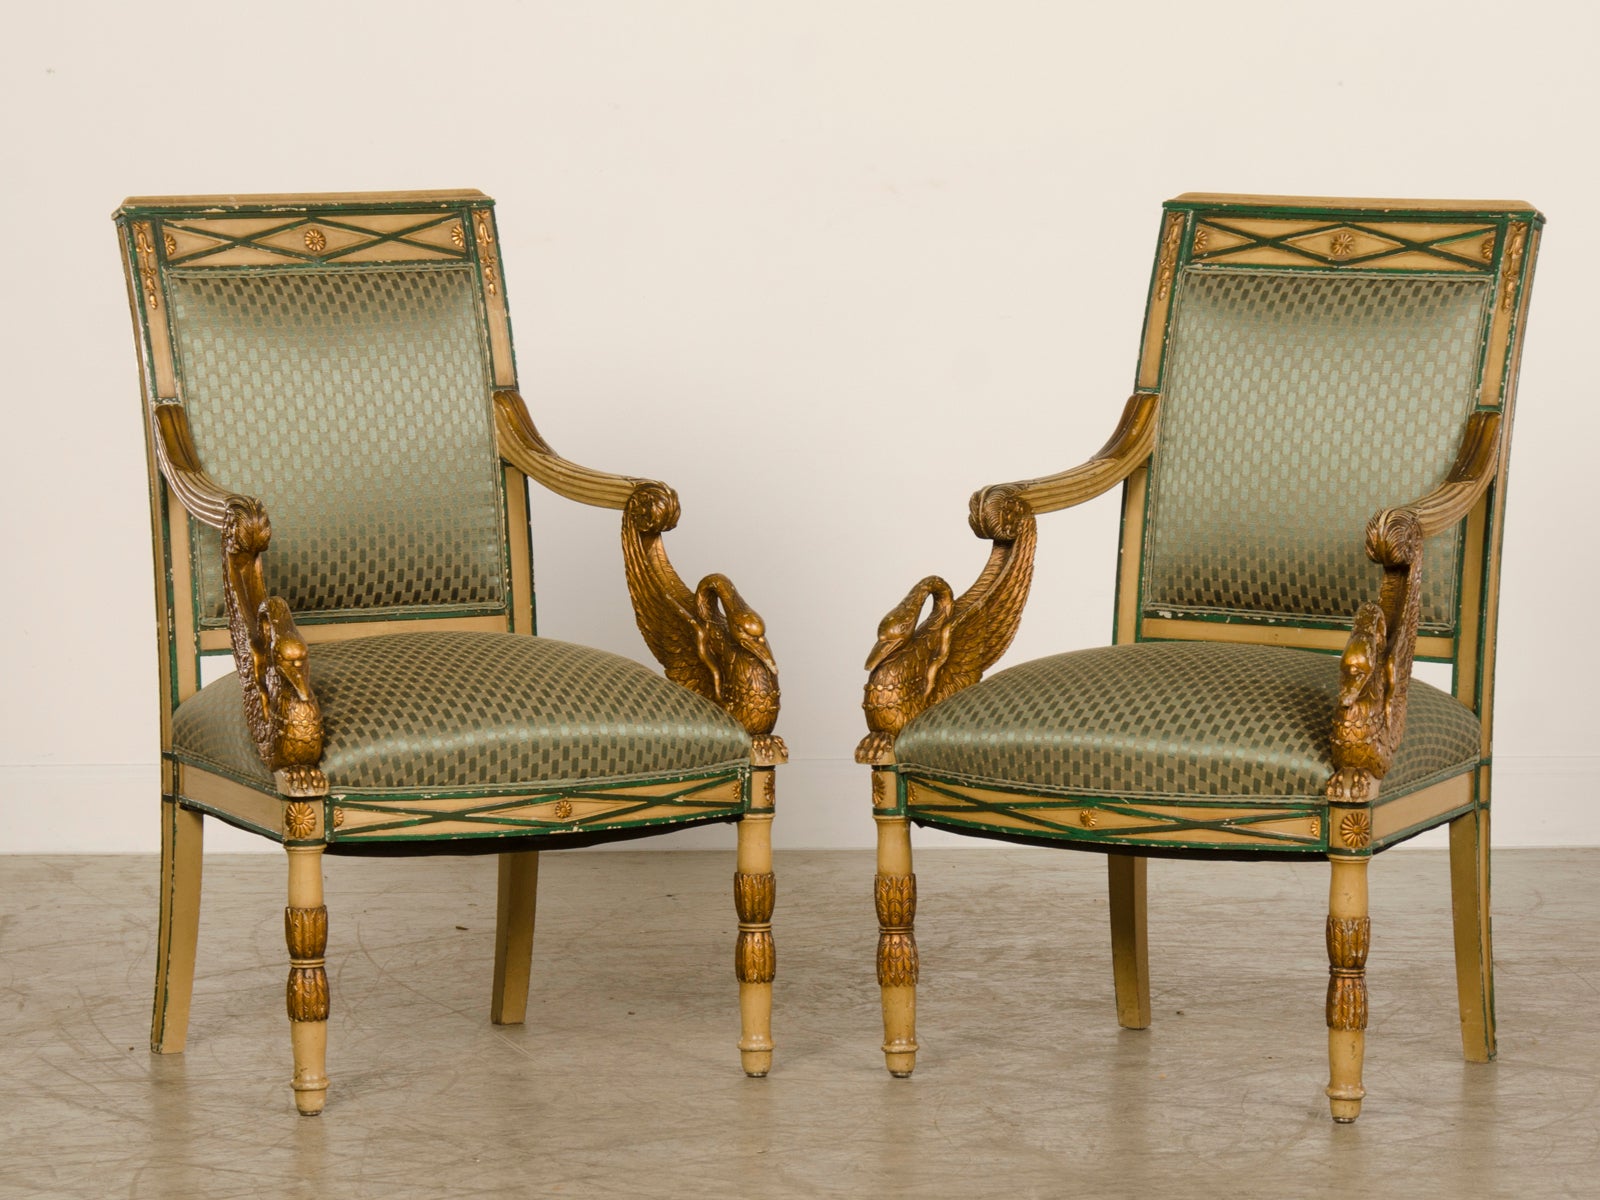 Empire period pair painted and gilded arm chairs from France c.1810